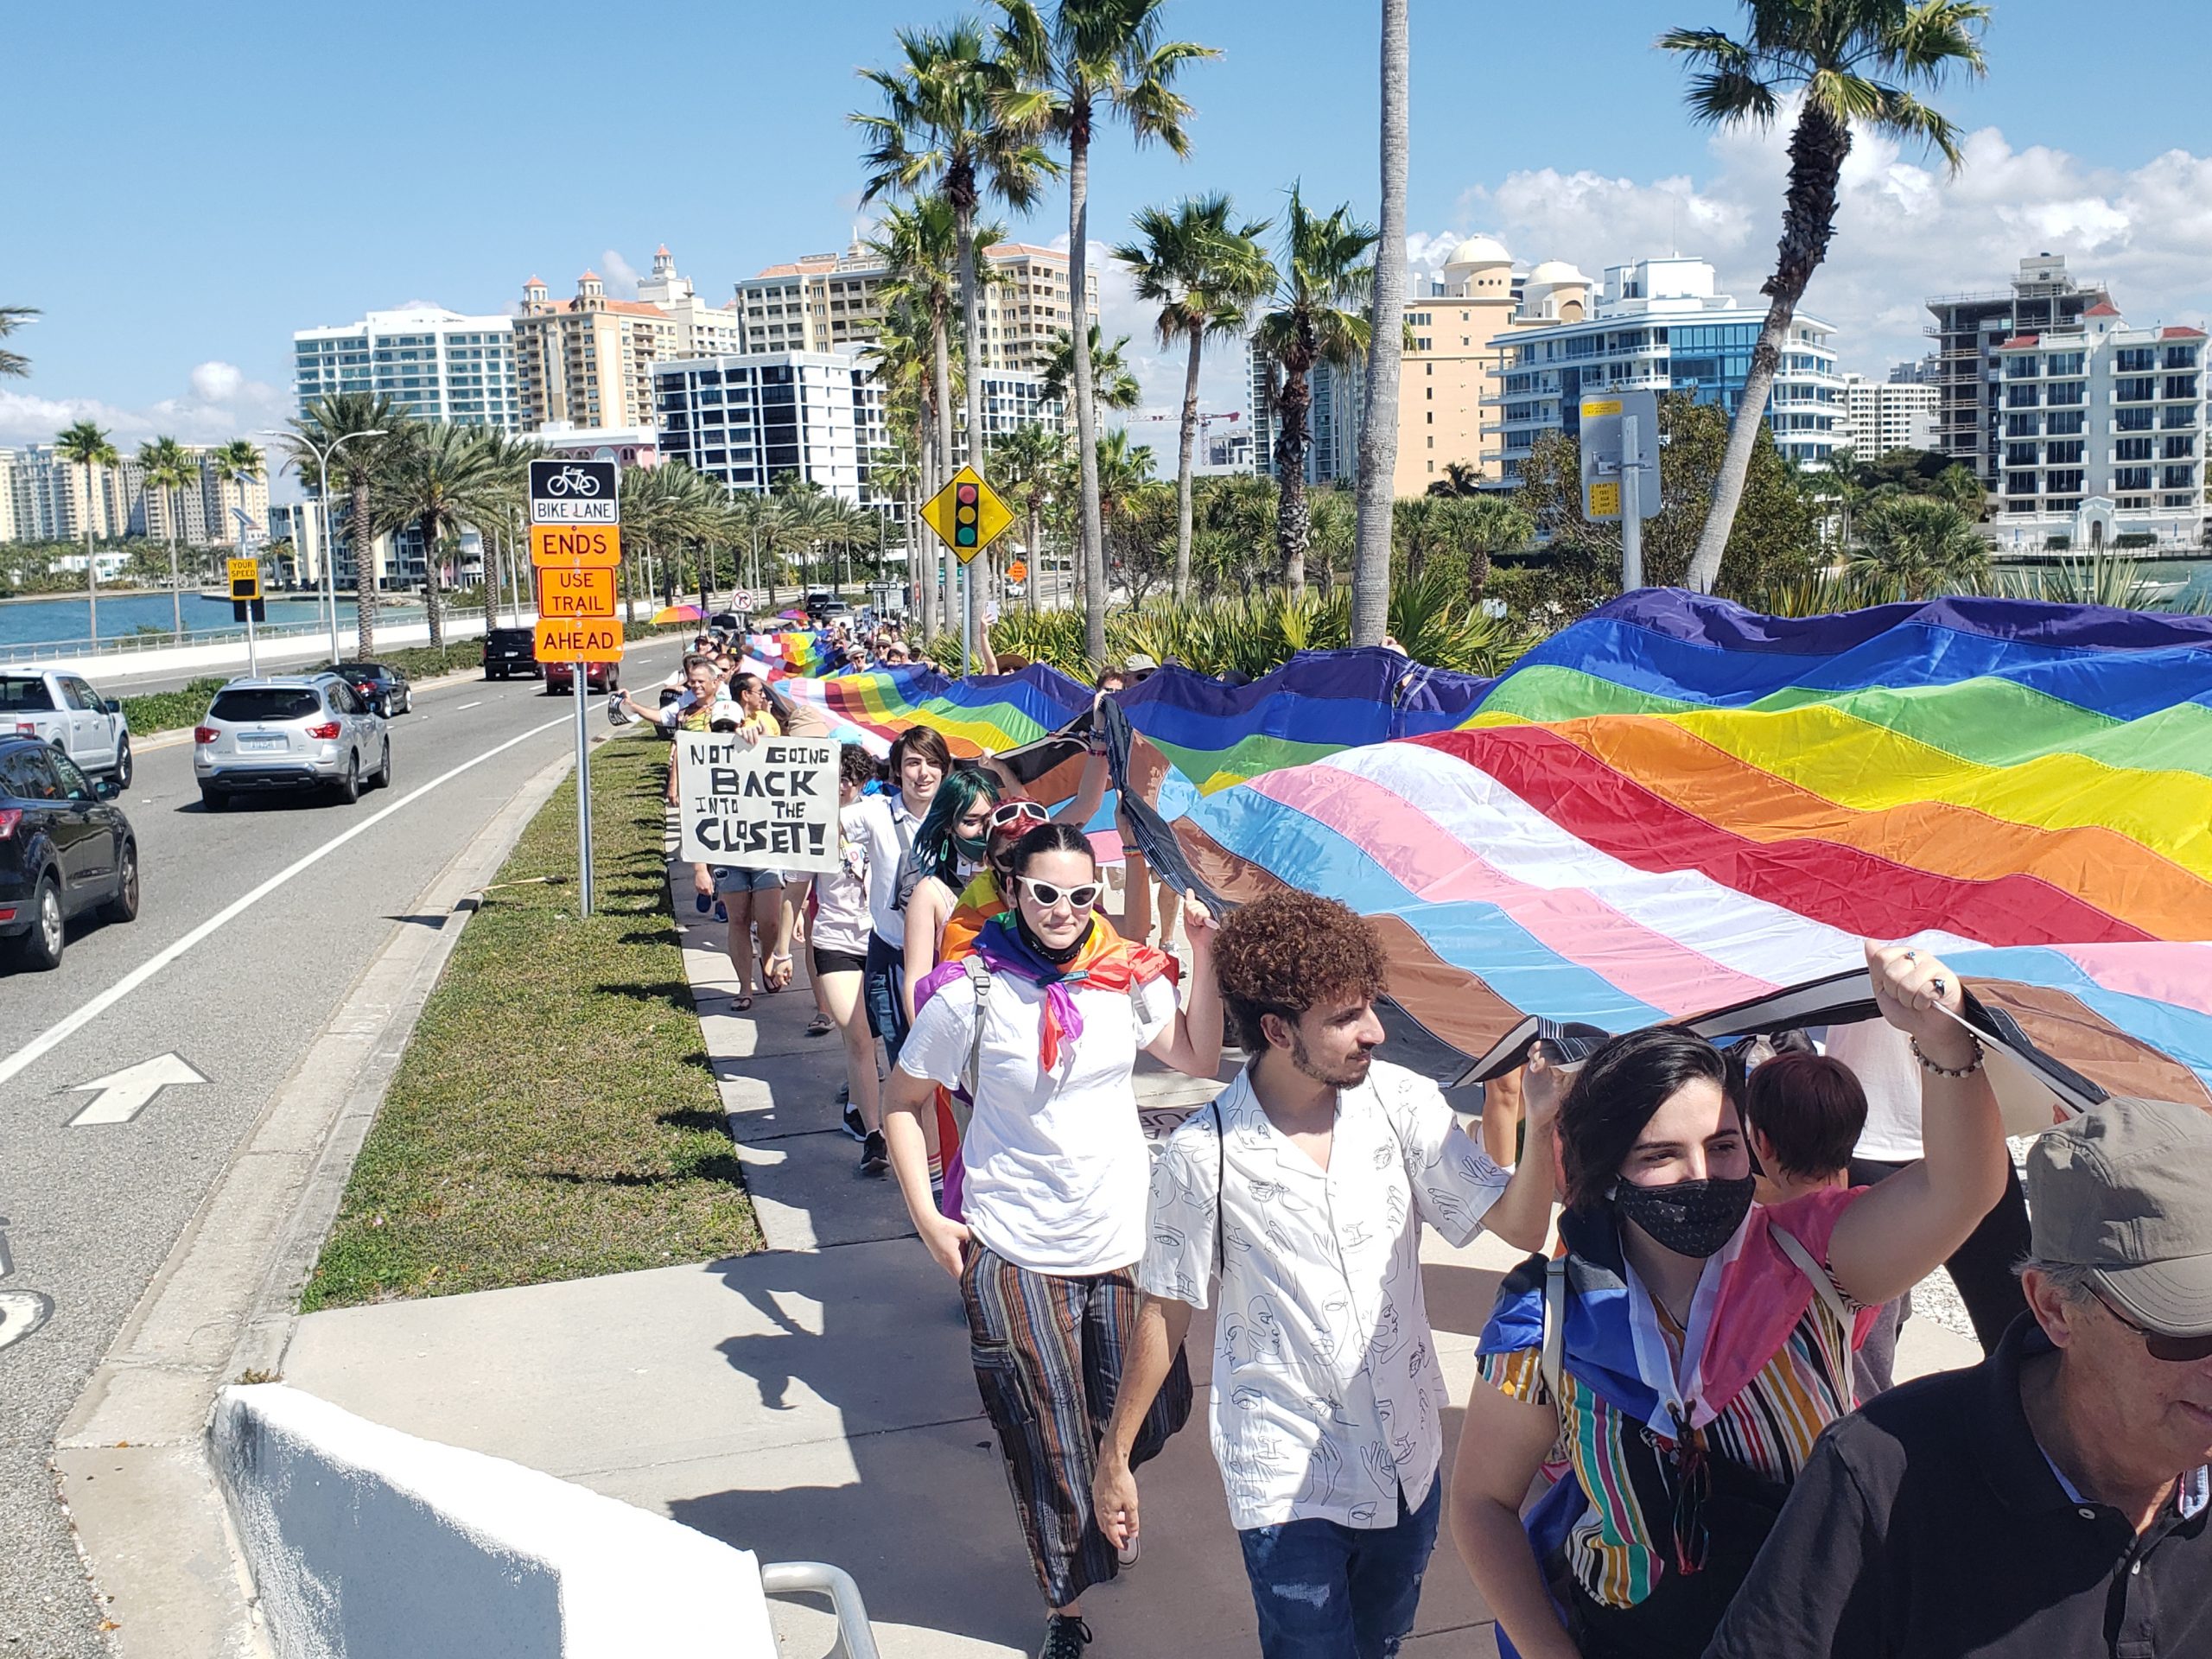 Florida’s “Don’t Say Gay” bill passes first reading in Senate Committee, is met with community protest